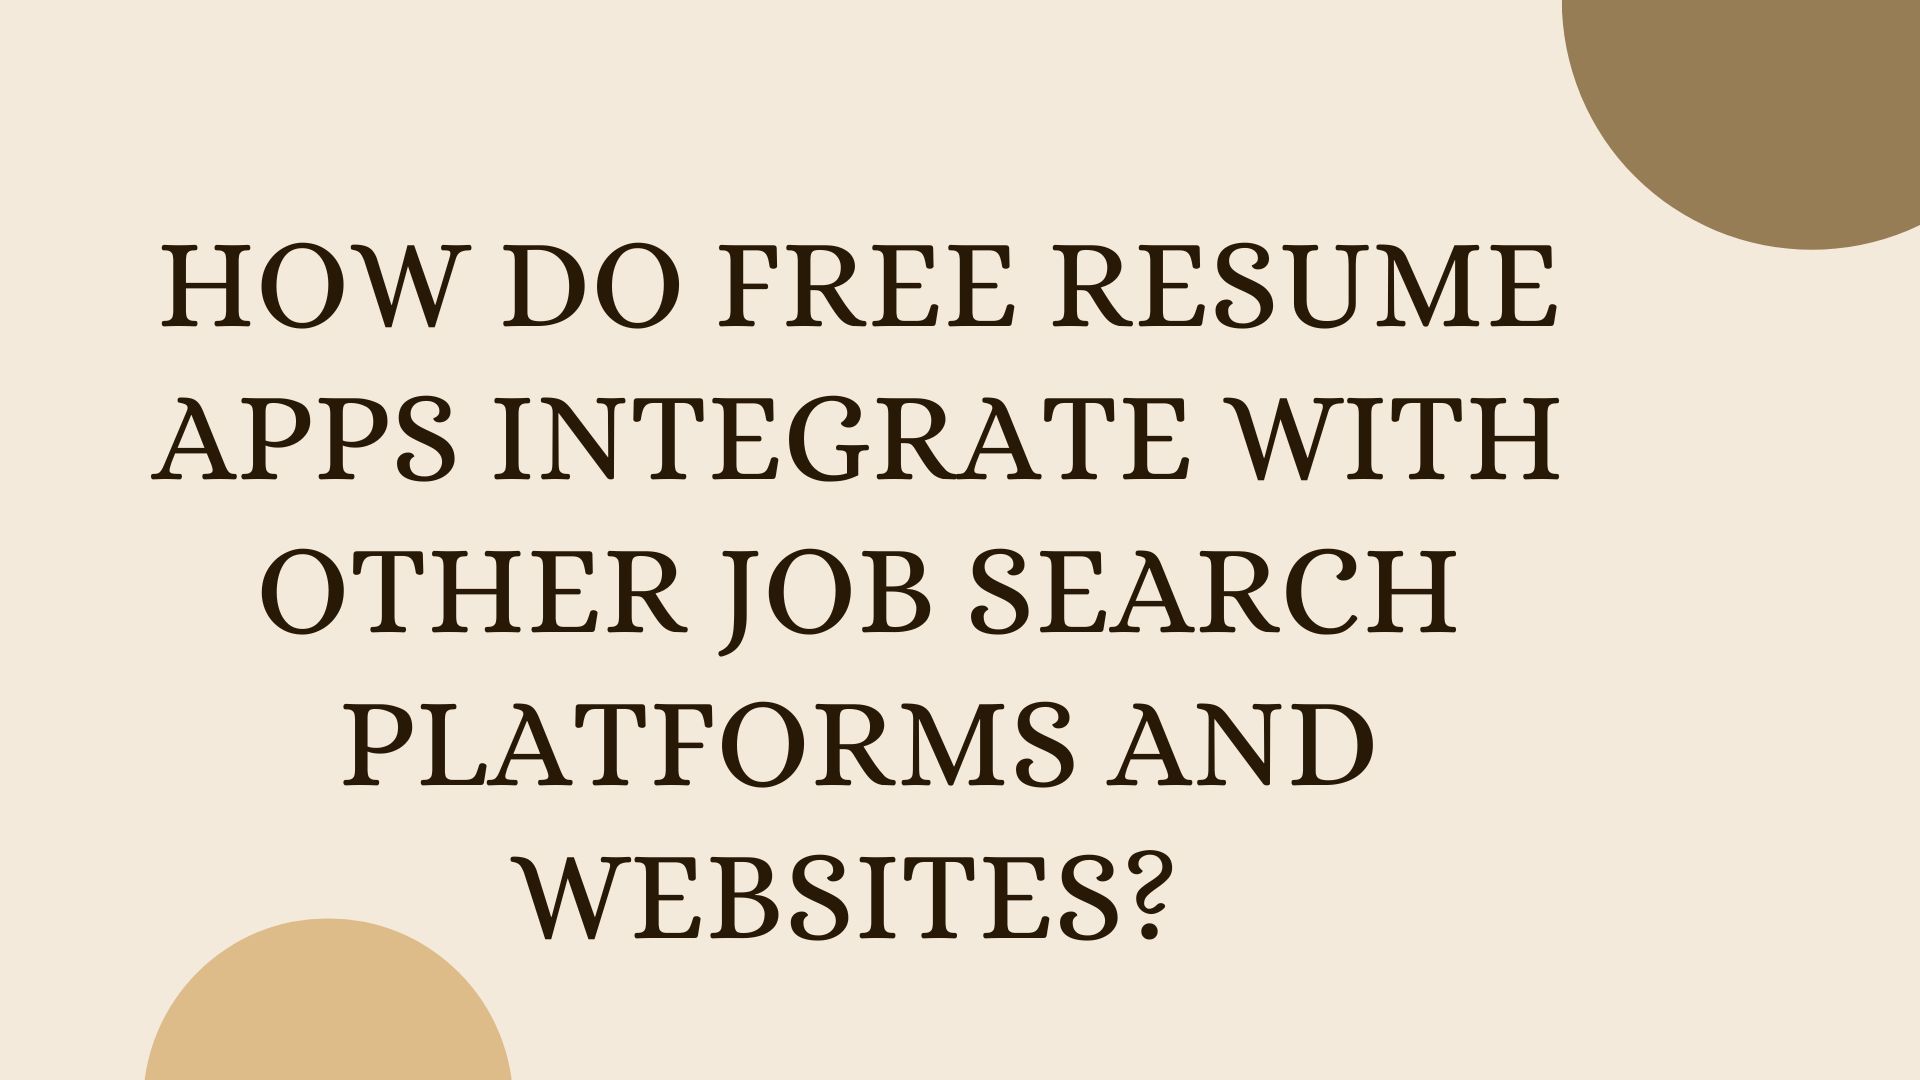 How do free resume apps integrate with other job search platforms and websites?